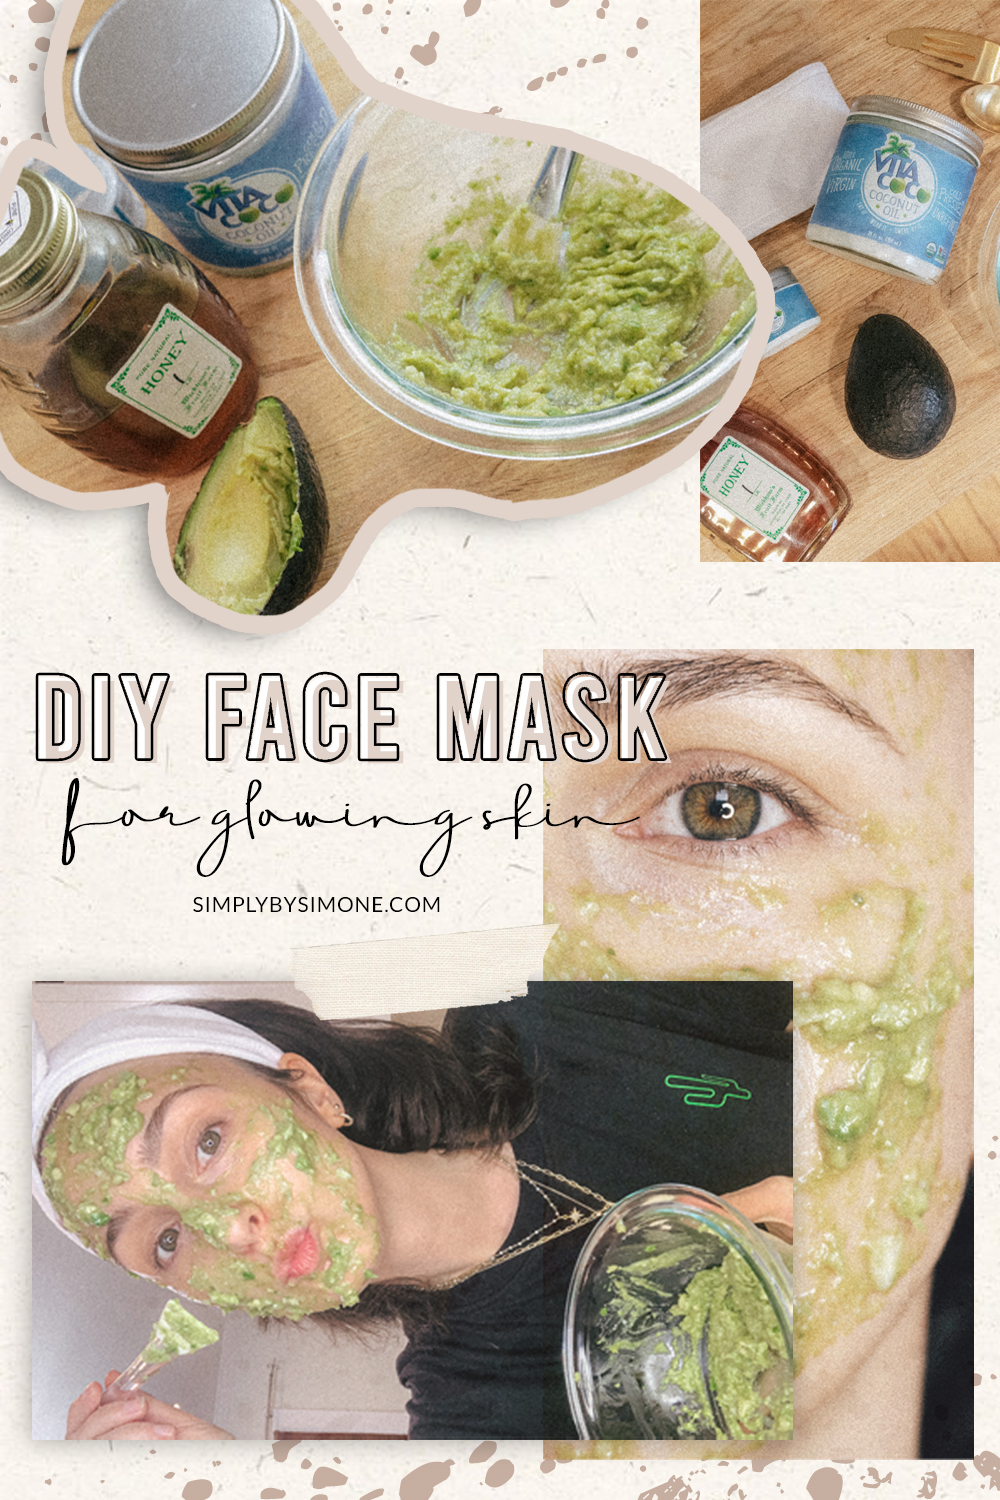 eiland Malaise Onhandig DIY Avocado Coconut Oil Face Mask for Glowing Skin - Simply by Simone